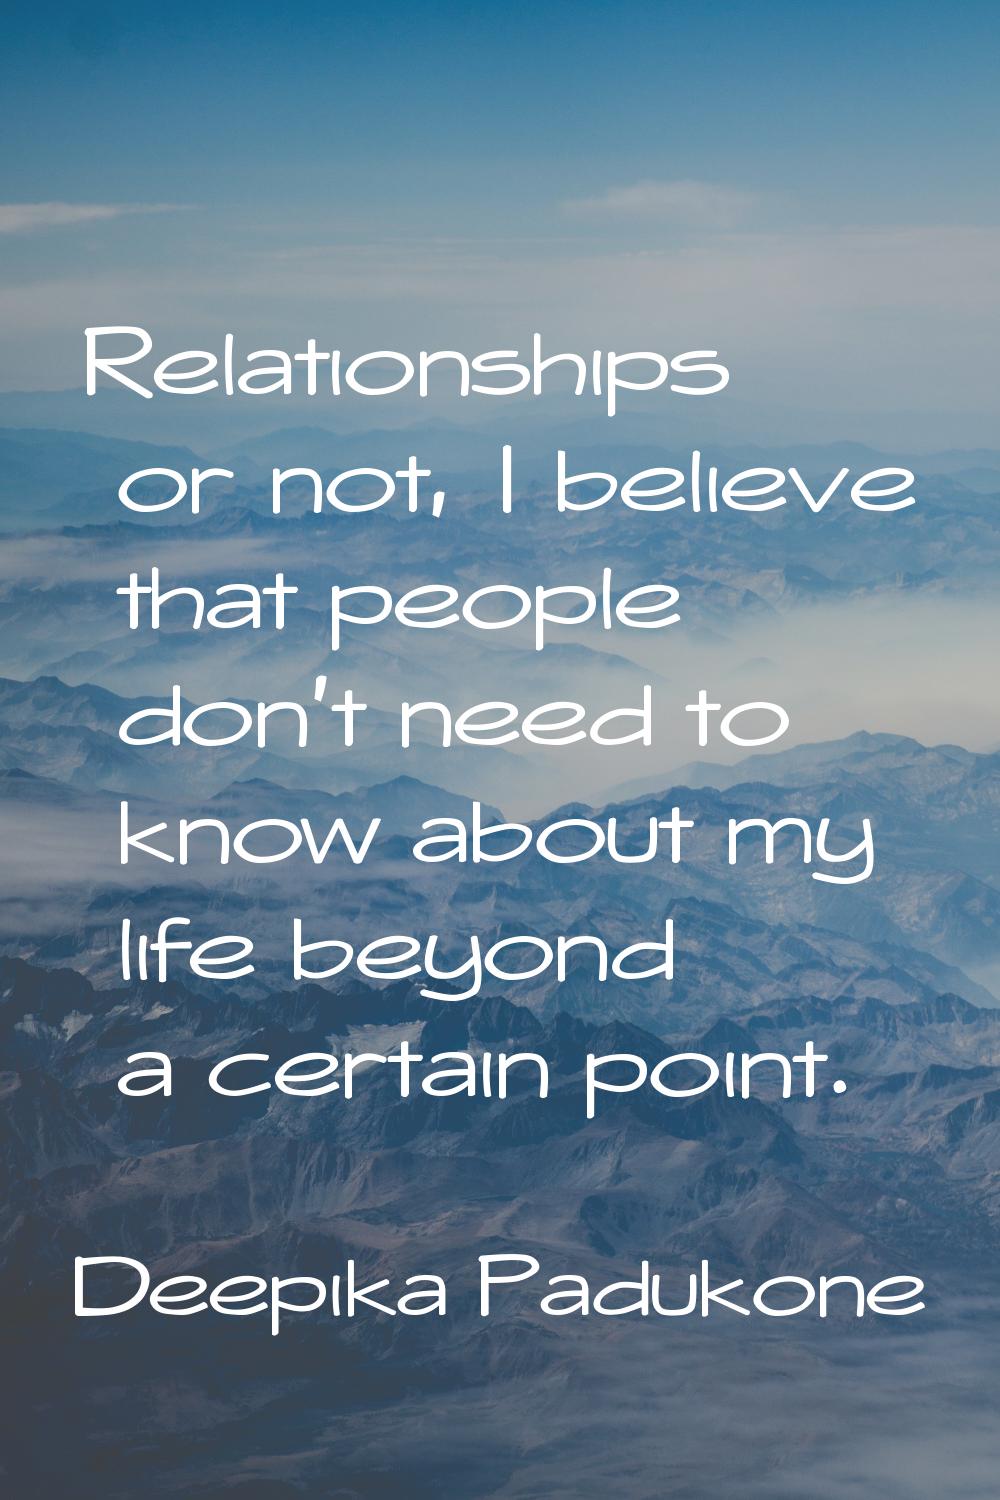 Relationships or not, I believe that people don't need to know about my life beyond a certain point